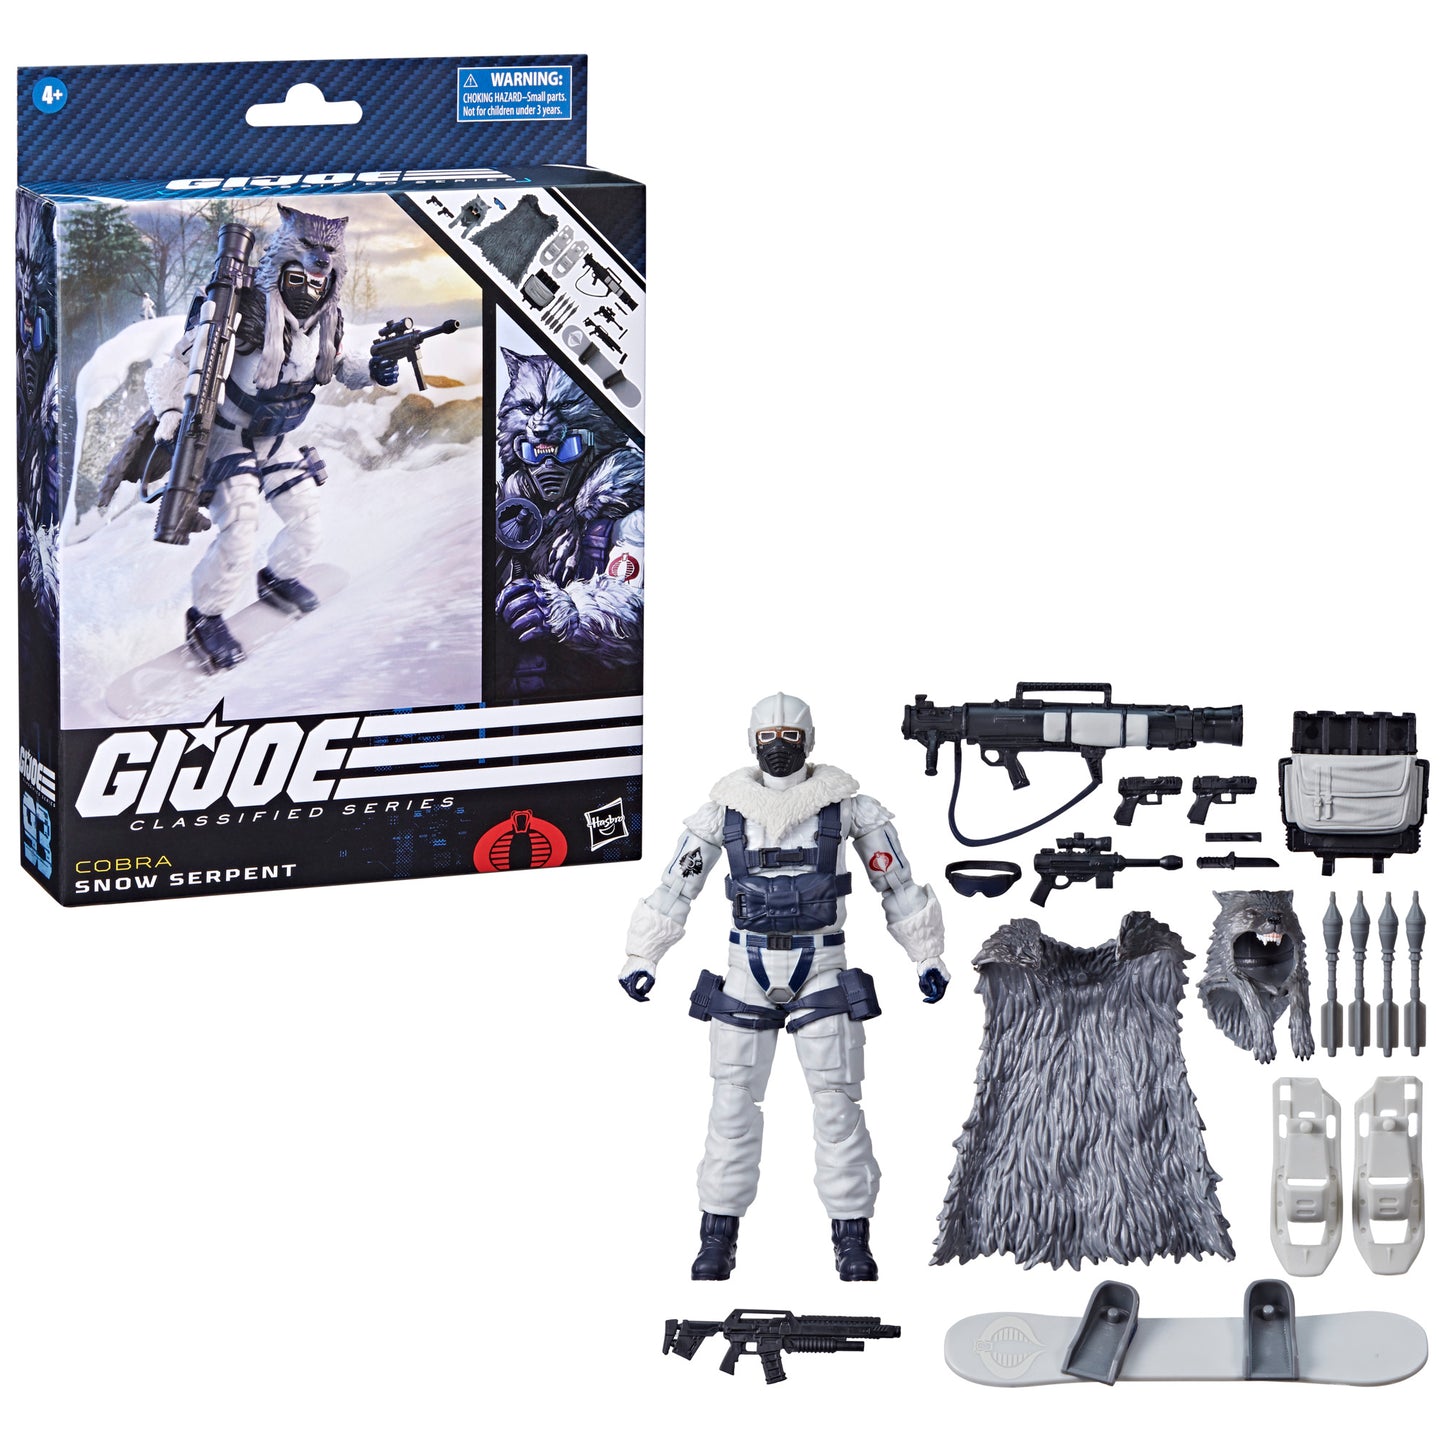 G.I. Joe Classified Series Snow Serpent, 93 Action Figure Toy